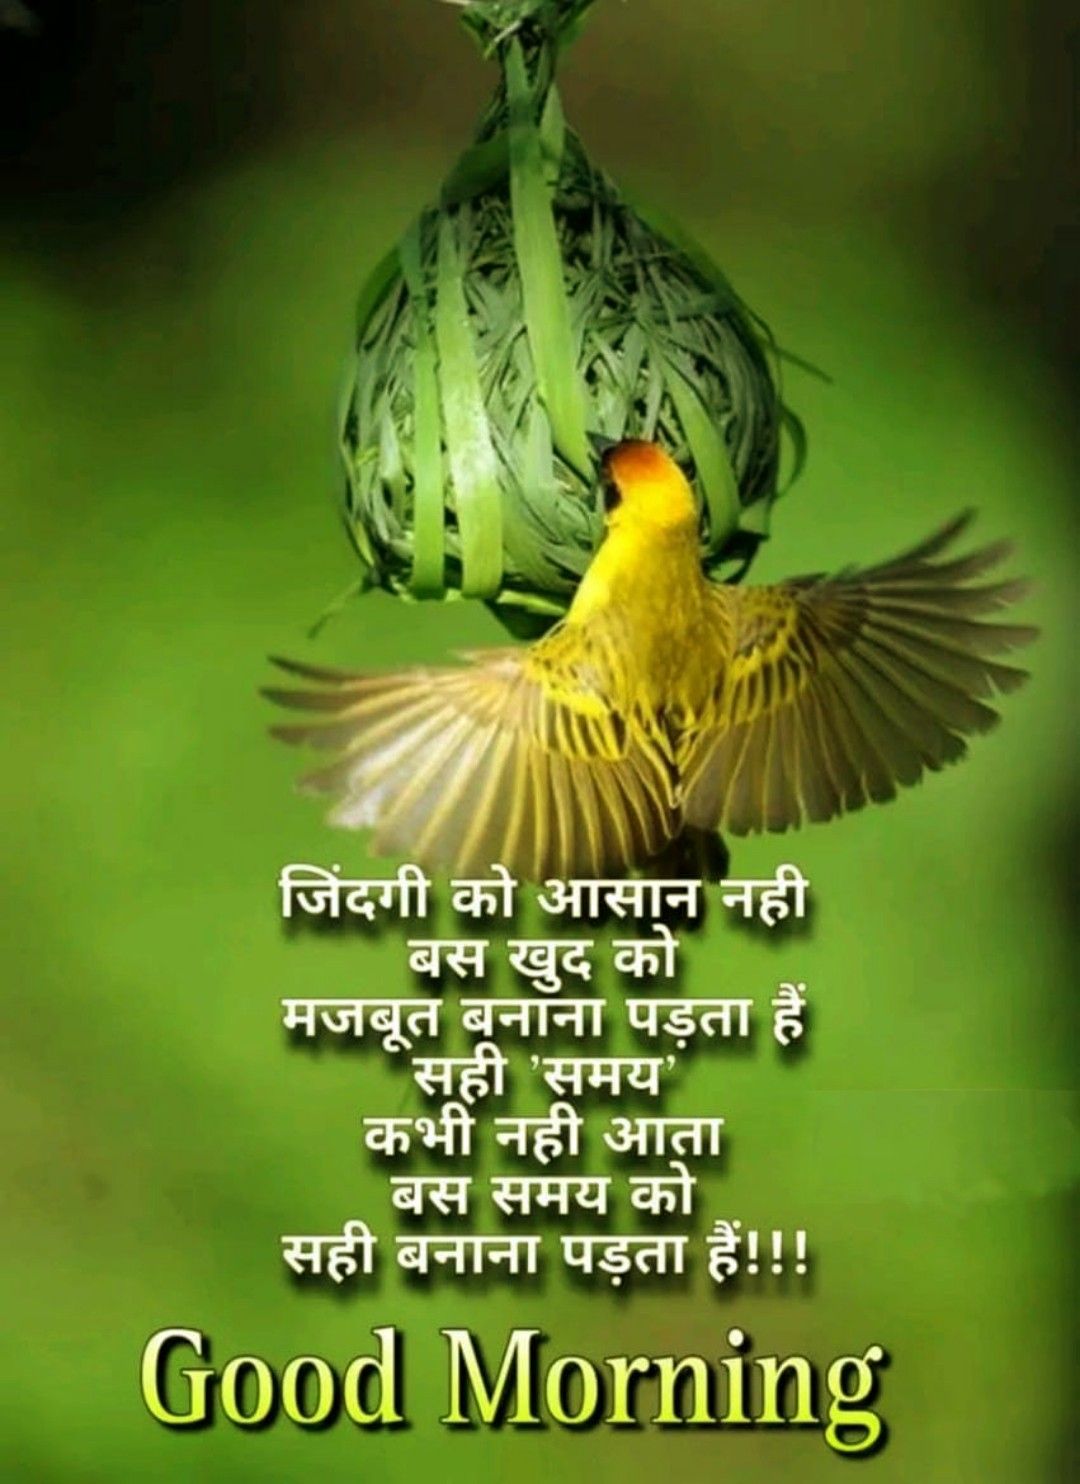 Good Morning Images with Quotes for Whatsapp in Hindi 3